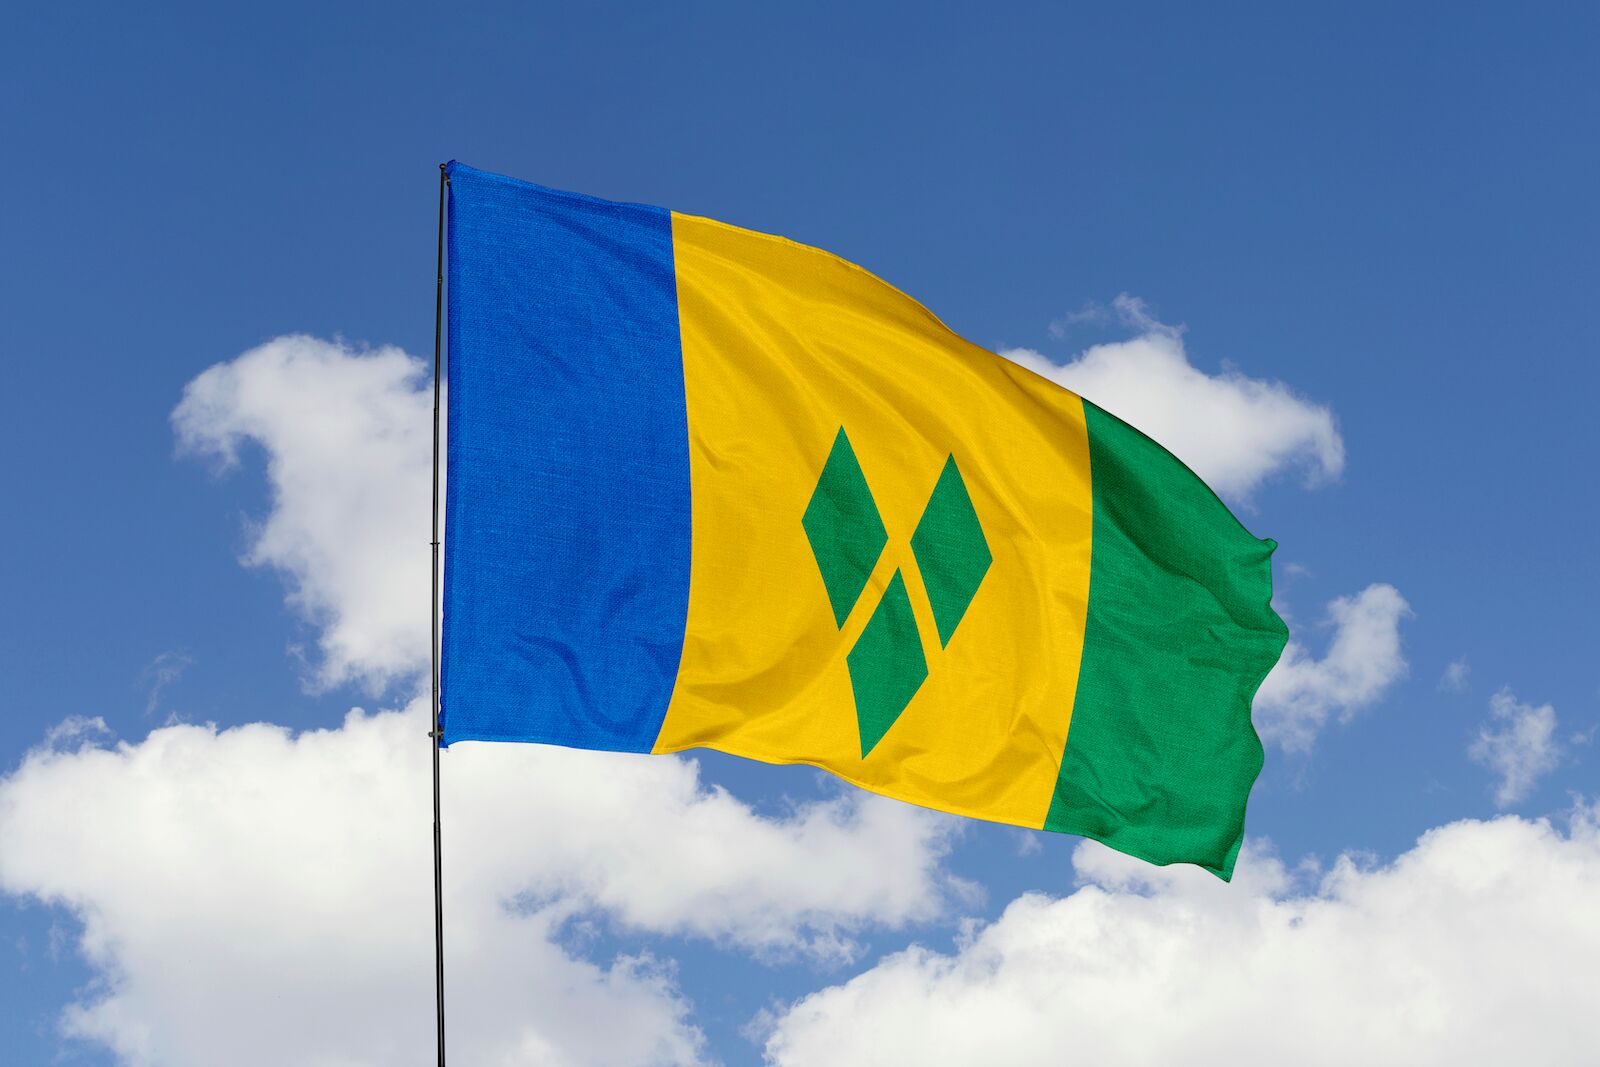 Caribbean flags: Saint Vincent and the Grenadines